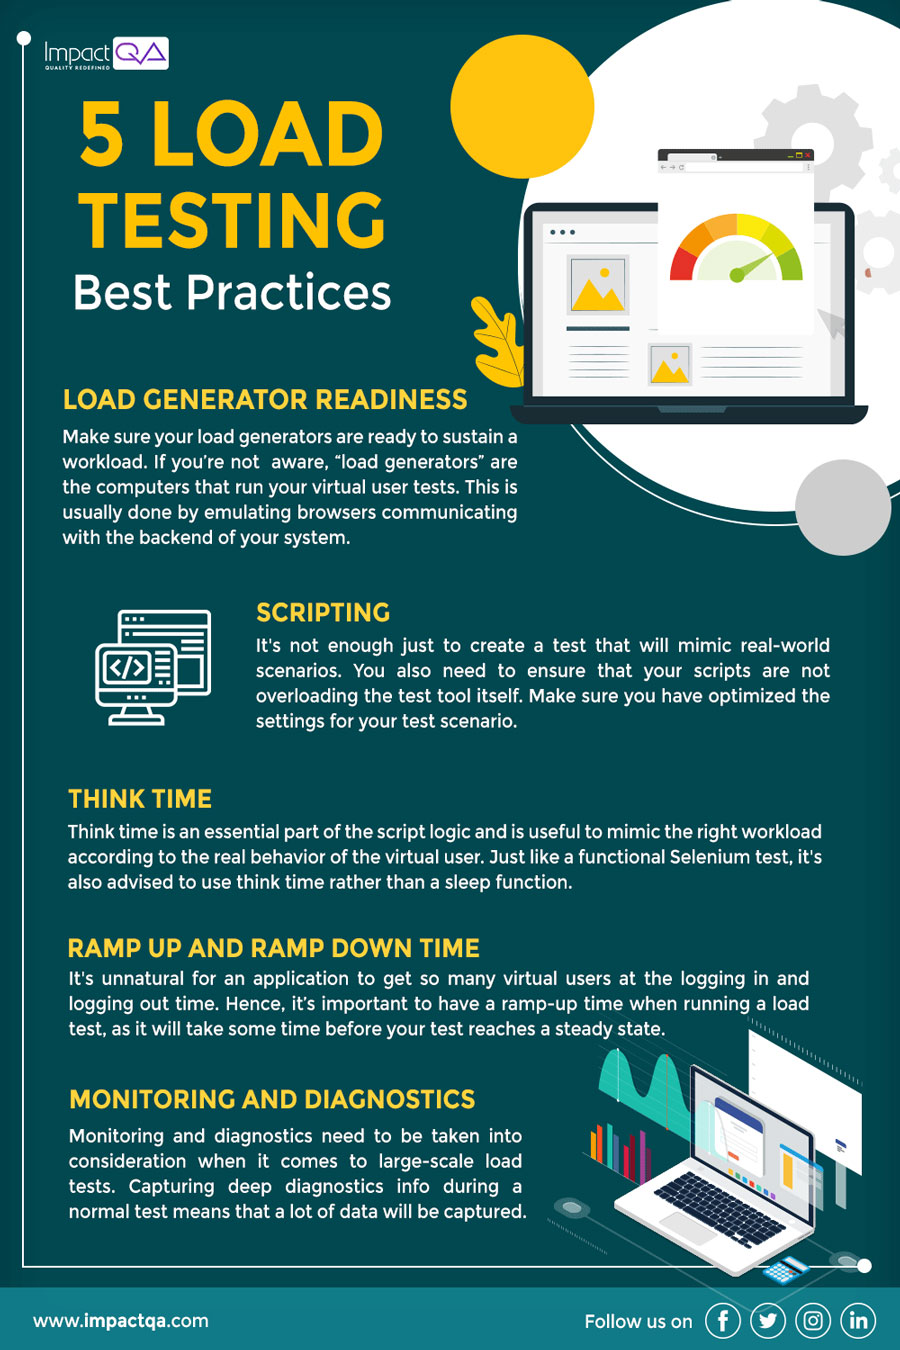 5 Load Testing Best Practices